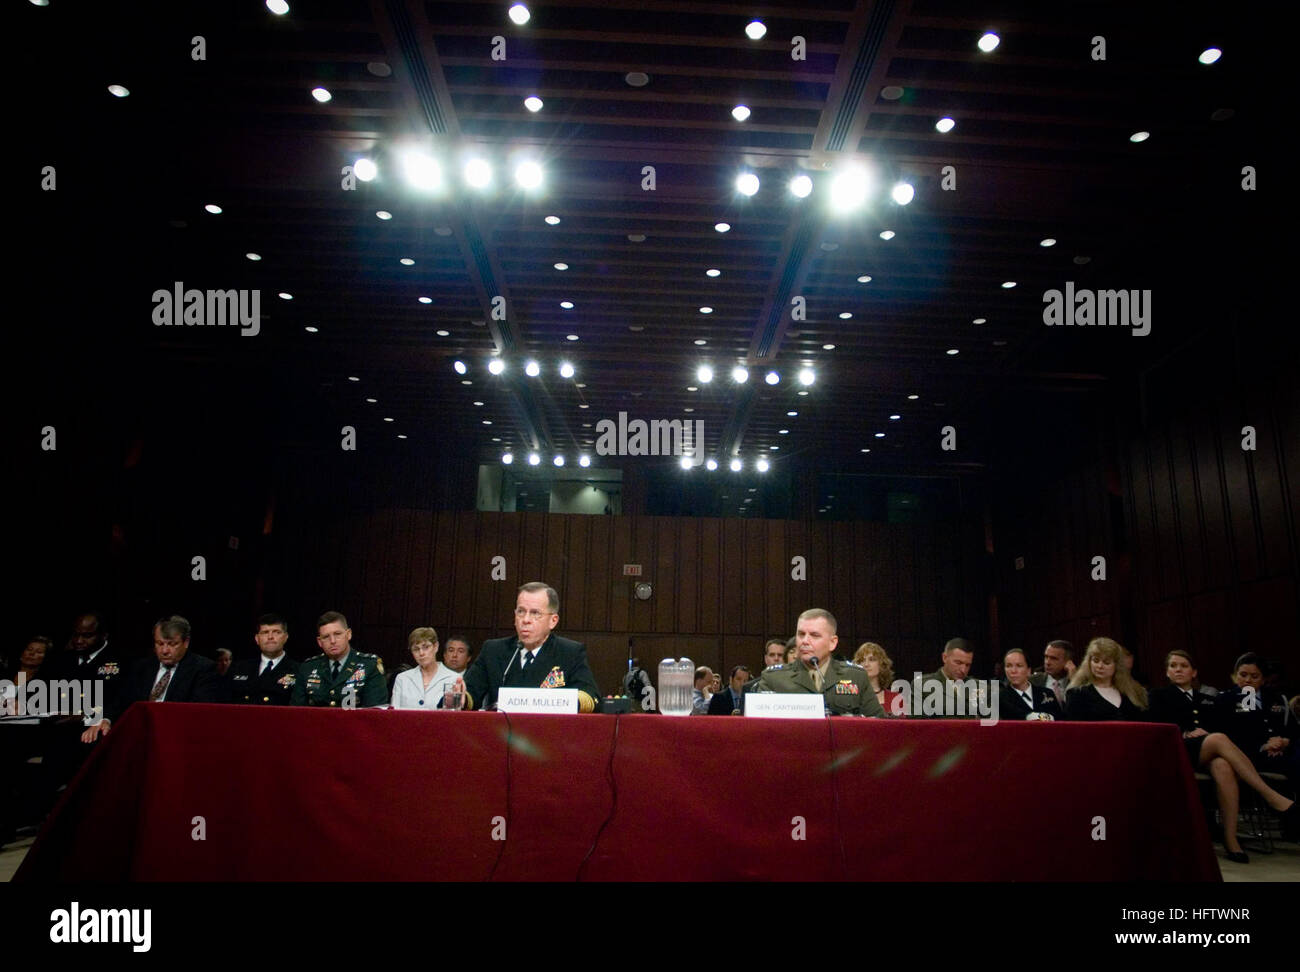 070731-N-0696M-092 WASHINGTON (July 31, 2007) - Chief of Naval Operations (CNO) Adm. Mike Mullen and Commander, U.S. Strategic Command, Gen. James E. Cartwright testify before the Senate Armed Services Committee during their confirmation hearing for appointment to Chairman and Vice Chairman of the Joint Chiefs of Staff at Hart Senate Office Building. U.S. Navy photo by Mass Communication Specialist 1st Class Chad J. McNeeley (RELEASED) US Navy 070731-N-0696M-092 Chief of Naval Operations (CNO) Adm. Mike Mullen and Commander, U.S. Strategic Command, Gen. James E. Cartwright testify before the S Stock Photo